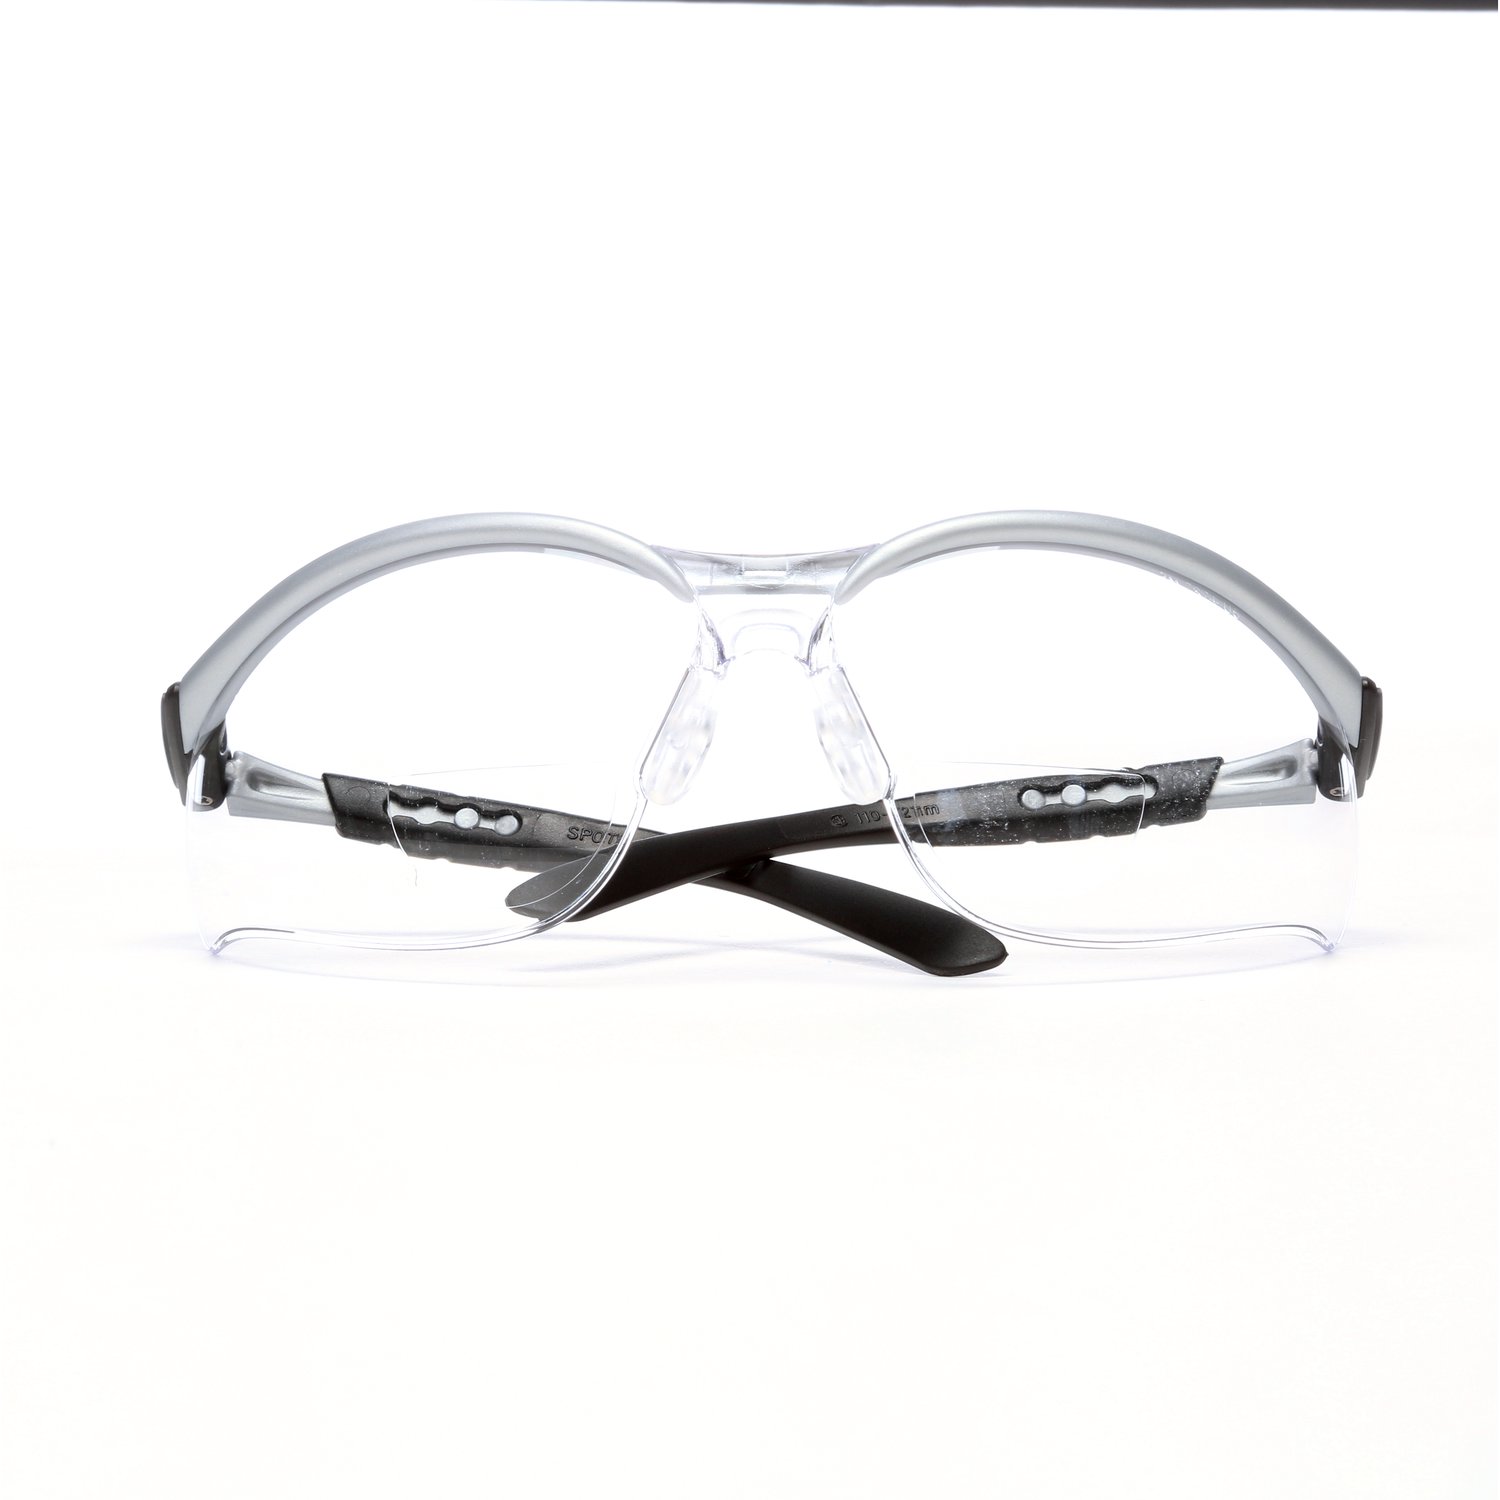 7000127490 - 3M BX Reader Protective Eyewear 11374-00000-20, Clear Lens, Silver
Frame, +1.5 Diopter, 20 ea/Case